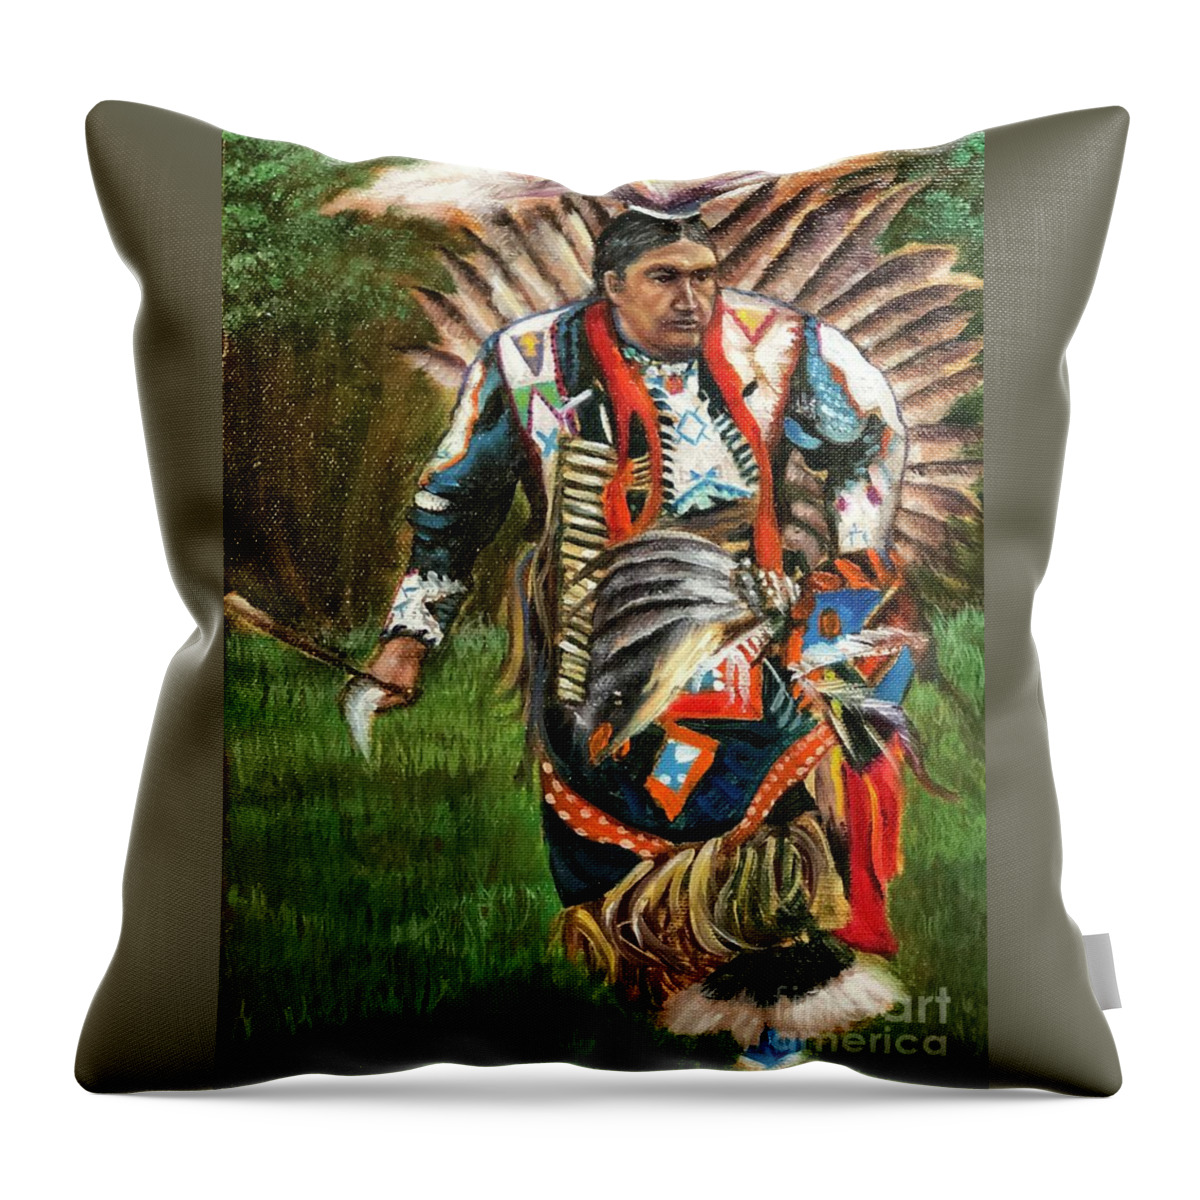 Native American Throw Pillow featuring the painting Native American by Leland Castro